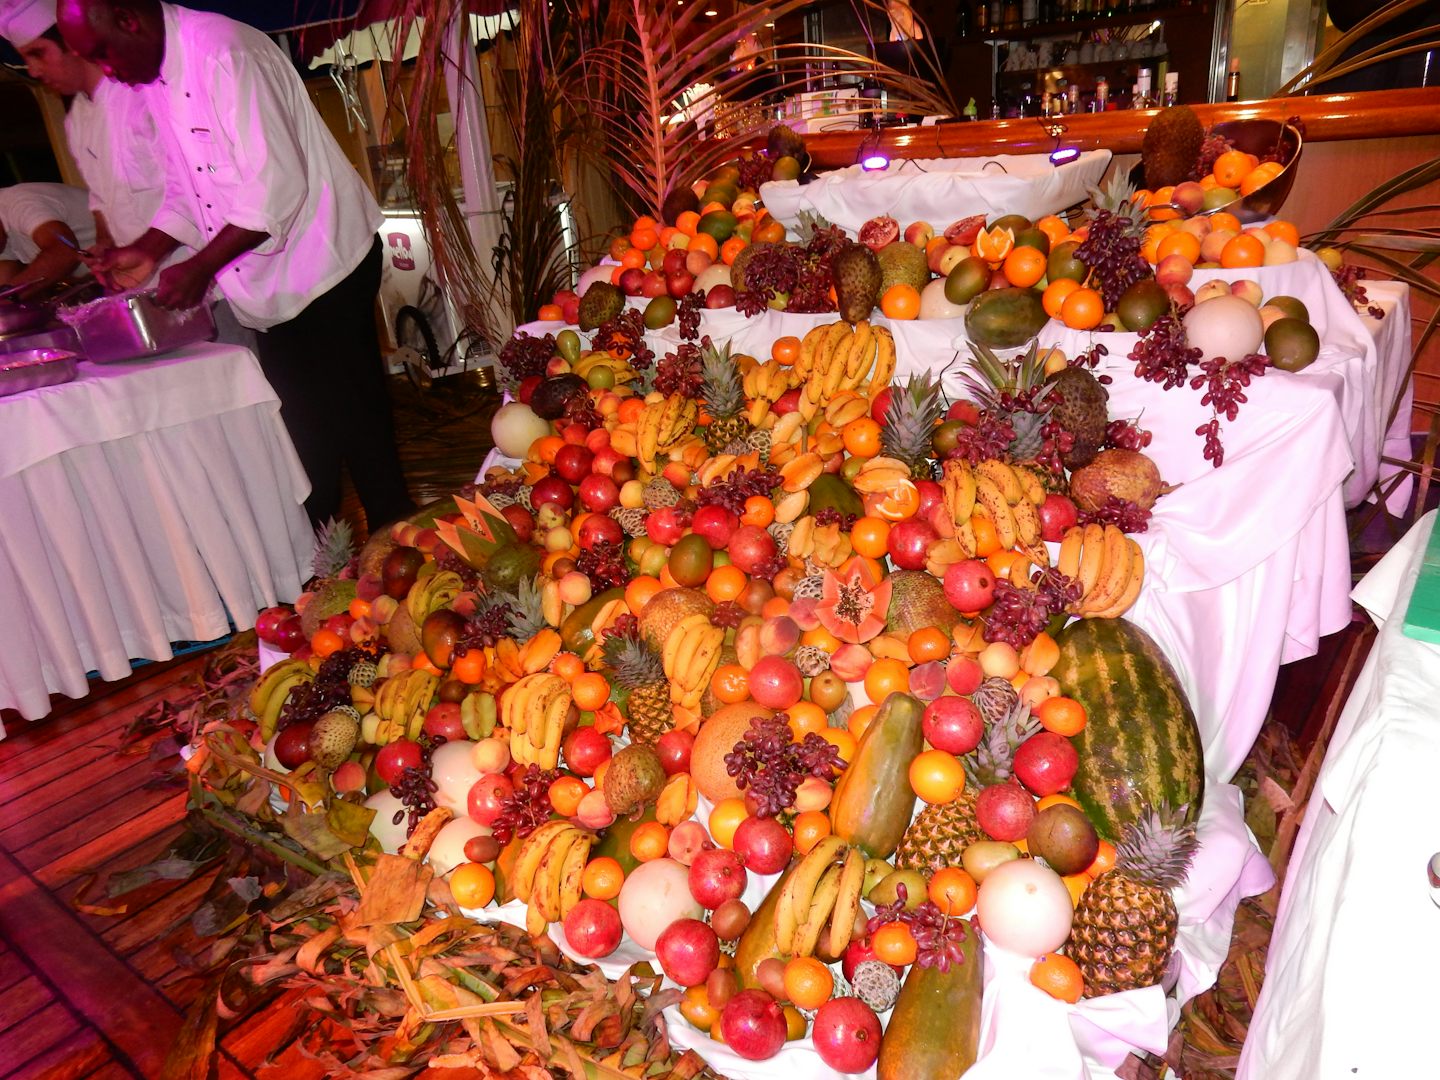 10 p.m. cuban buffet featured all types of tropical fruit!